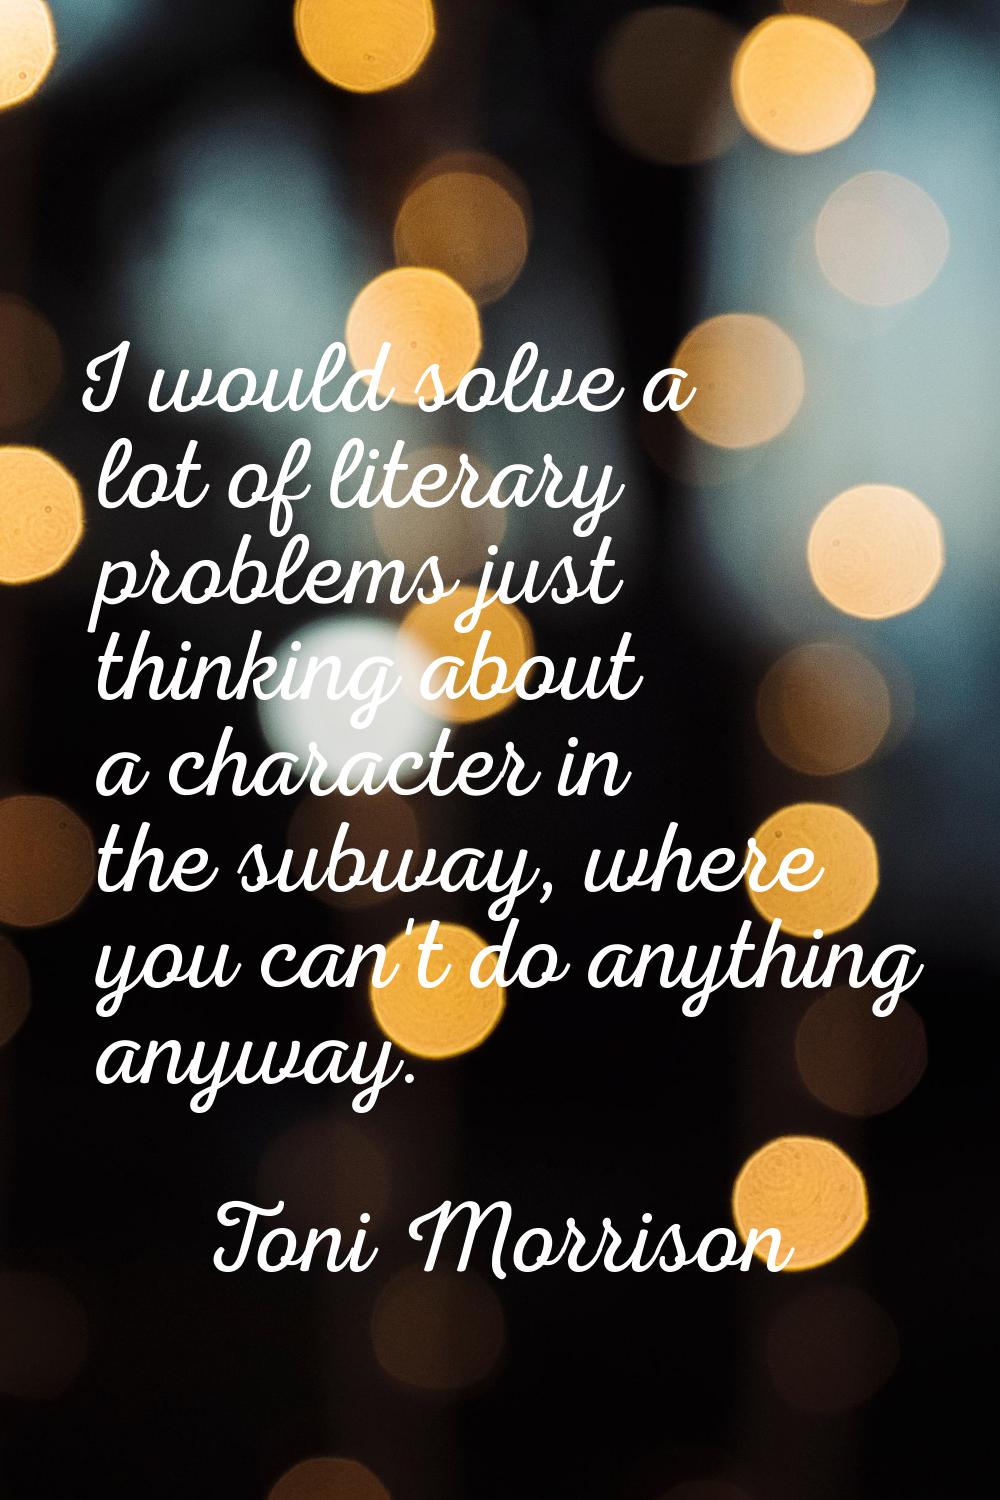 I would solve a lot of literary problems just thinking about a character in the subway, where you c